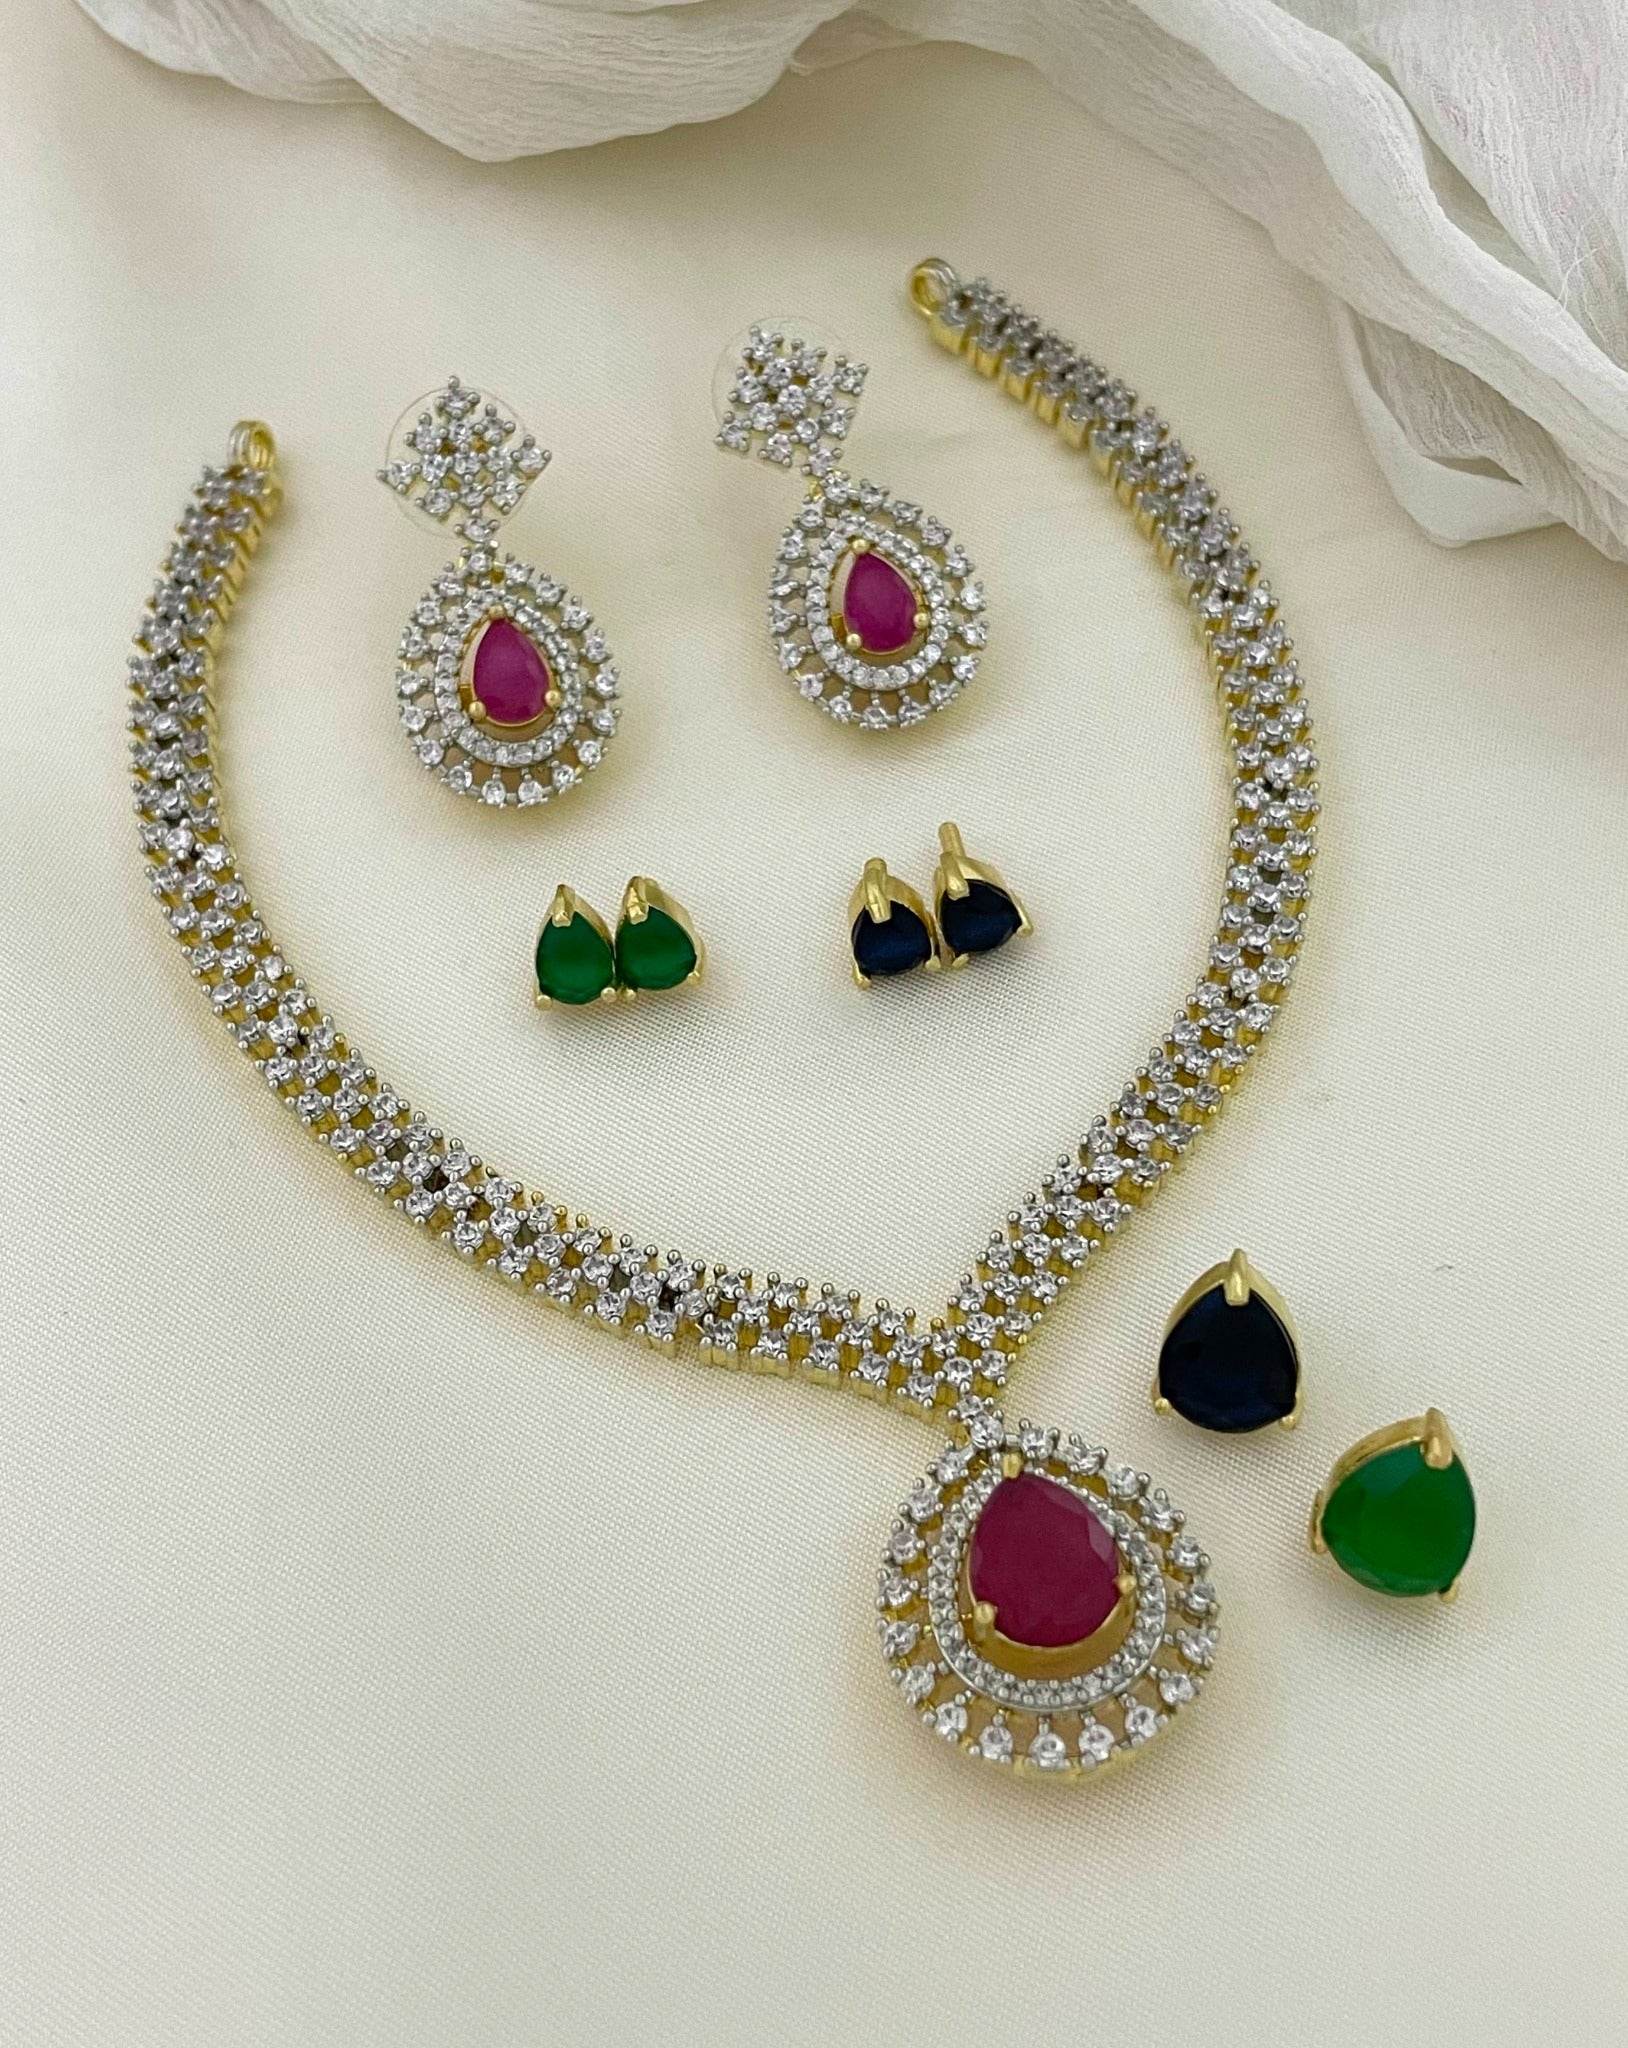 Diamond Necklace with Interchangeable Stones - Indian Jewellery Designs